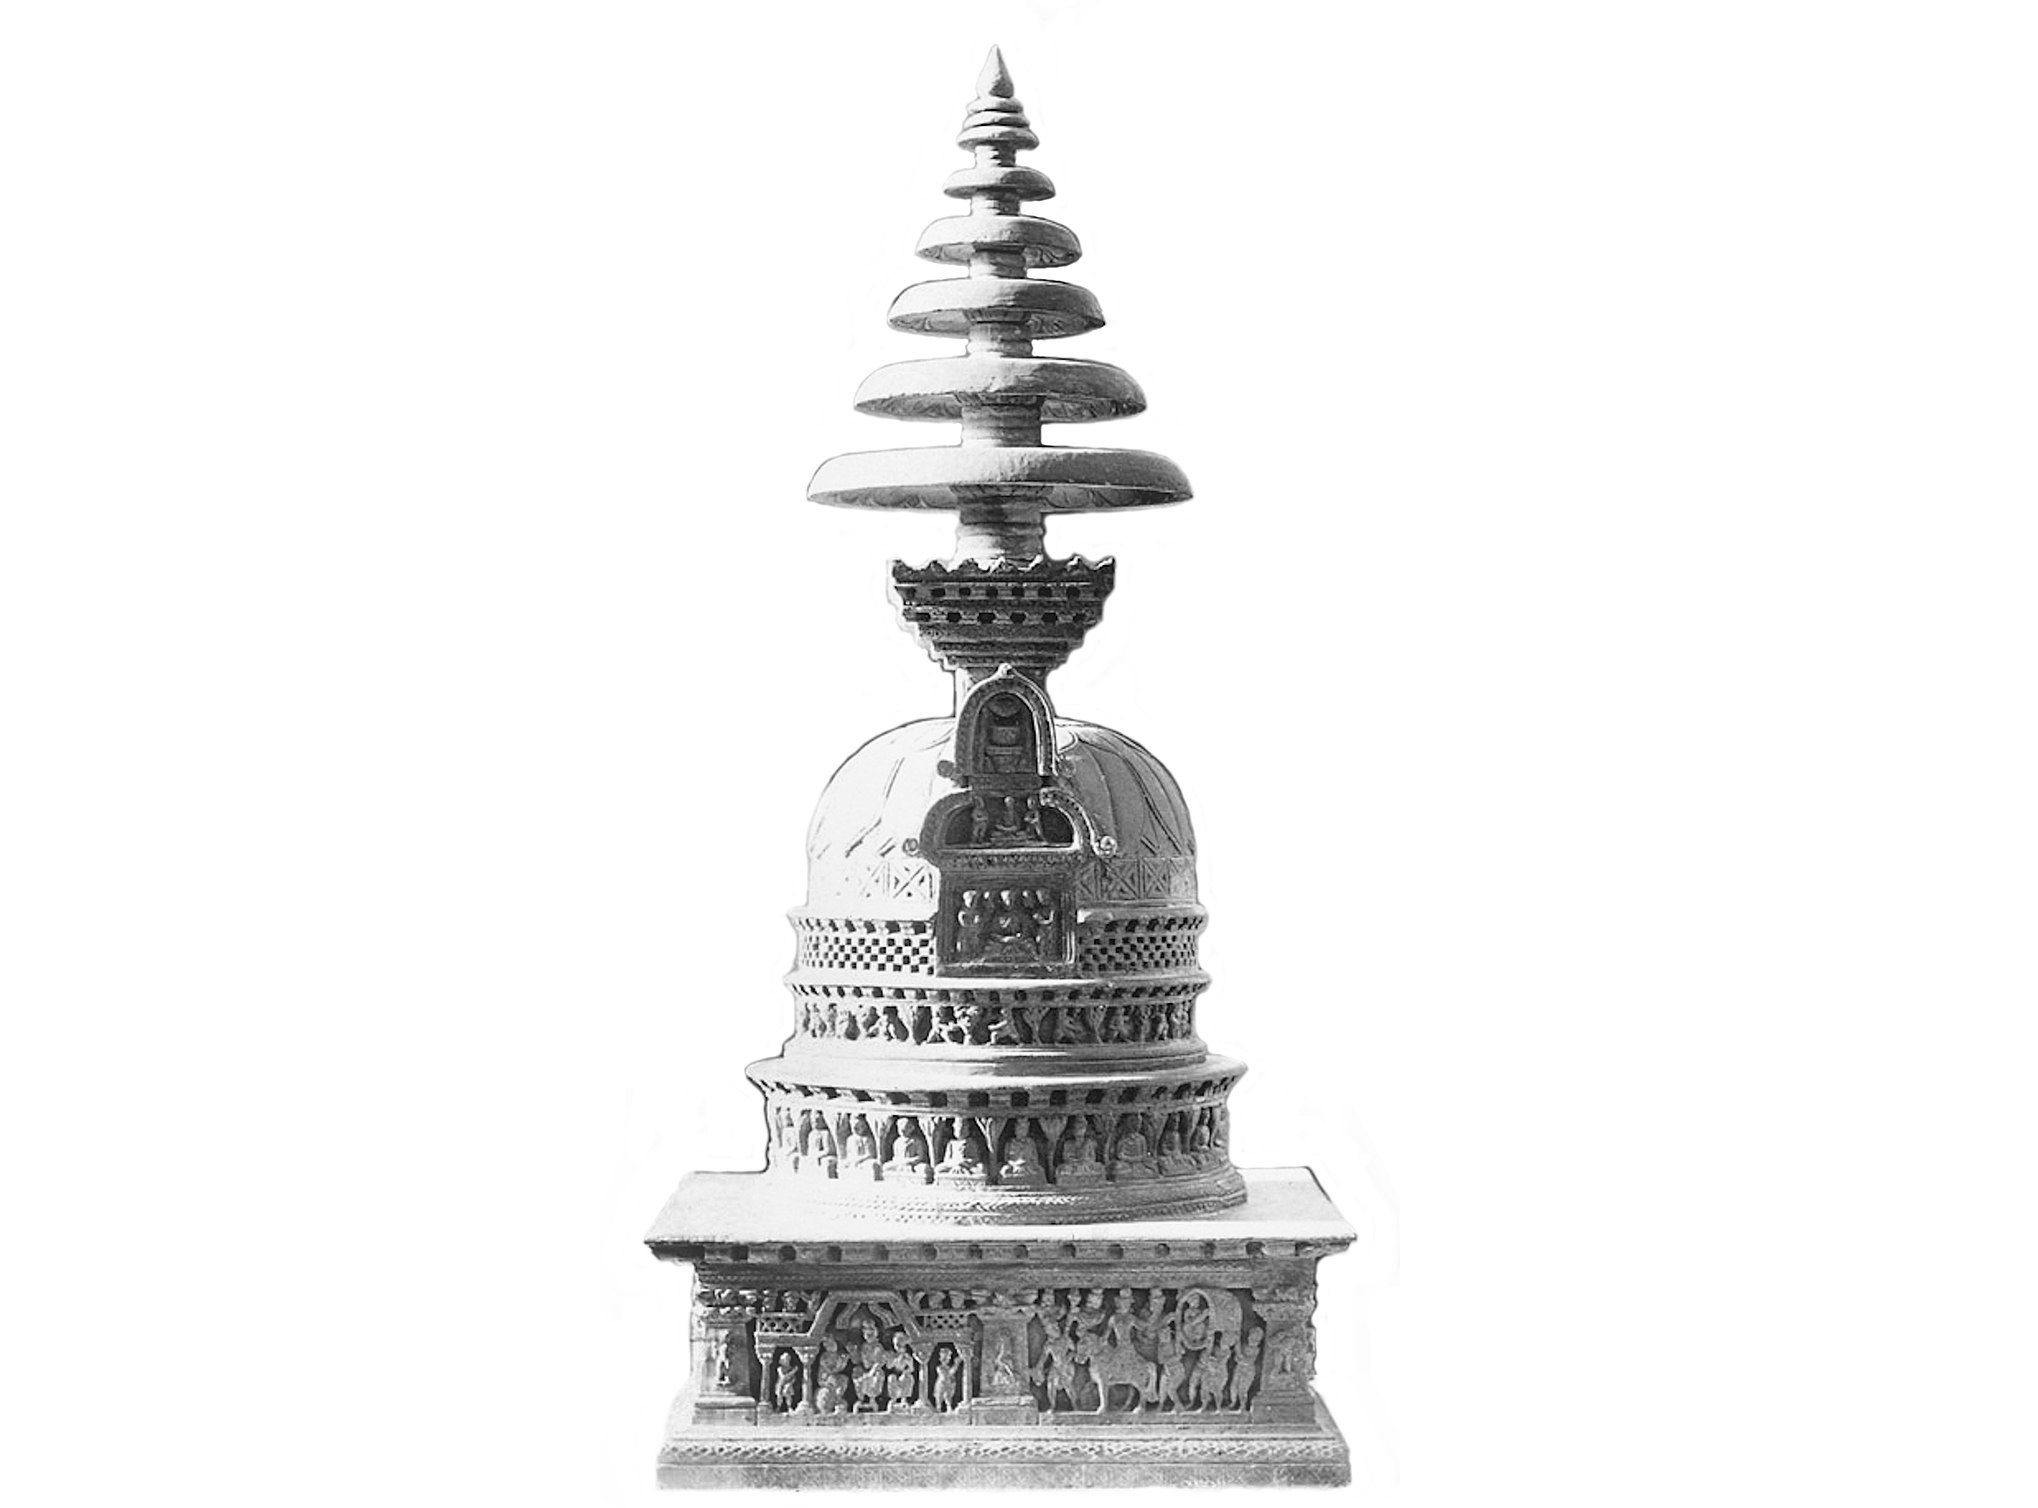 Probable initial appearance of Kanishka’s stupa at the site of Loriyan Tangai in Gandhara, 2nd century CE